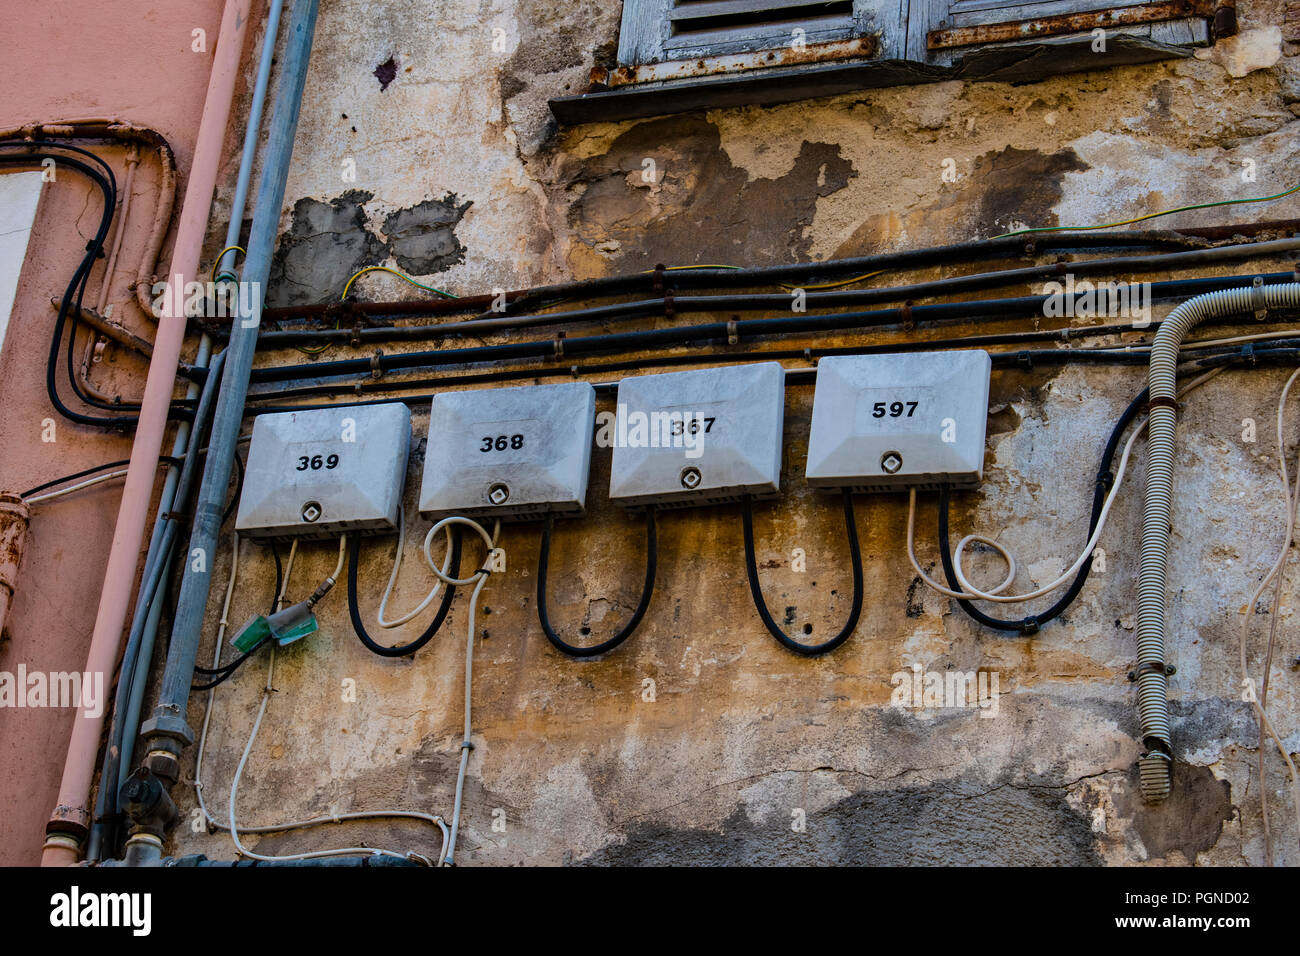 Electricity meters numbered on old cracked walls Stock Photo